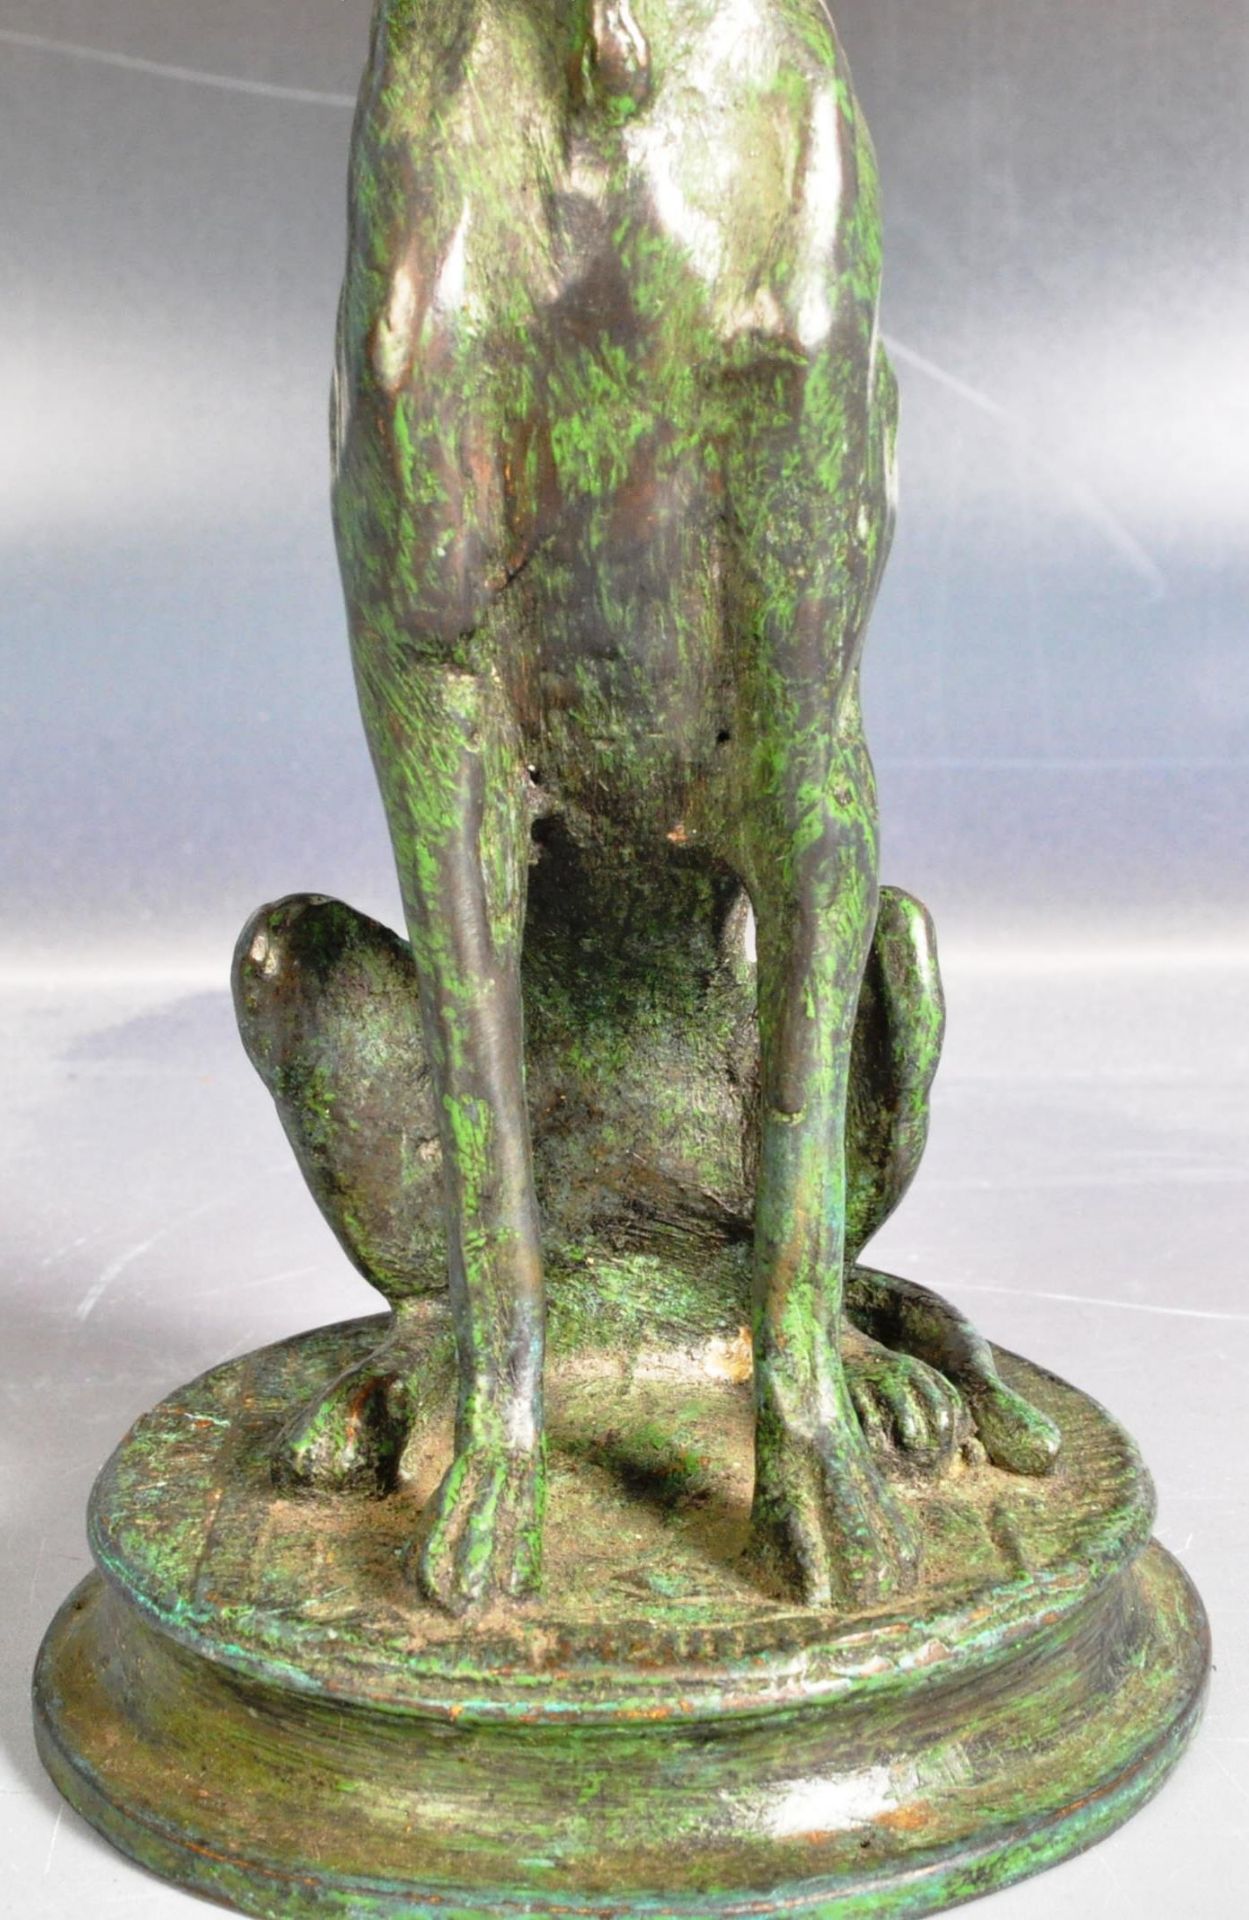 19TH CENTURY BRONZE ORNAMENT FIGURE IN THE FORM OF A GREYHOUND - Image 3 of 5